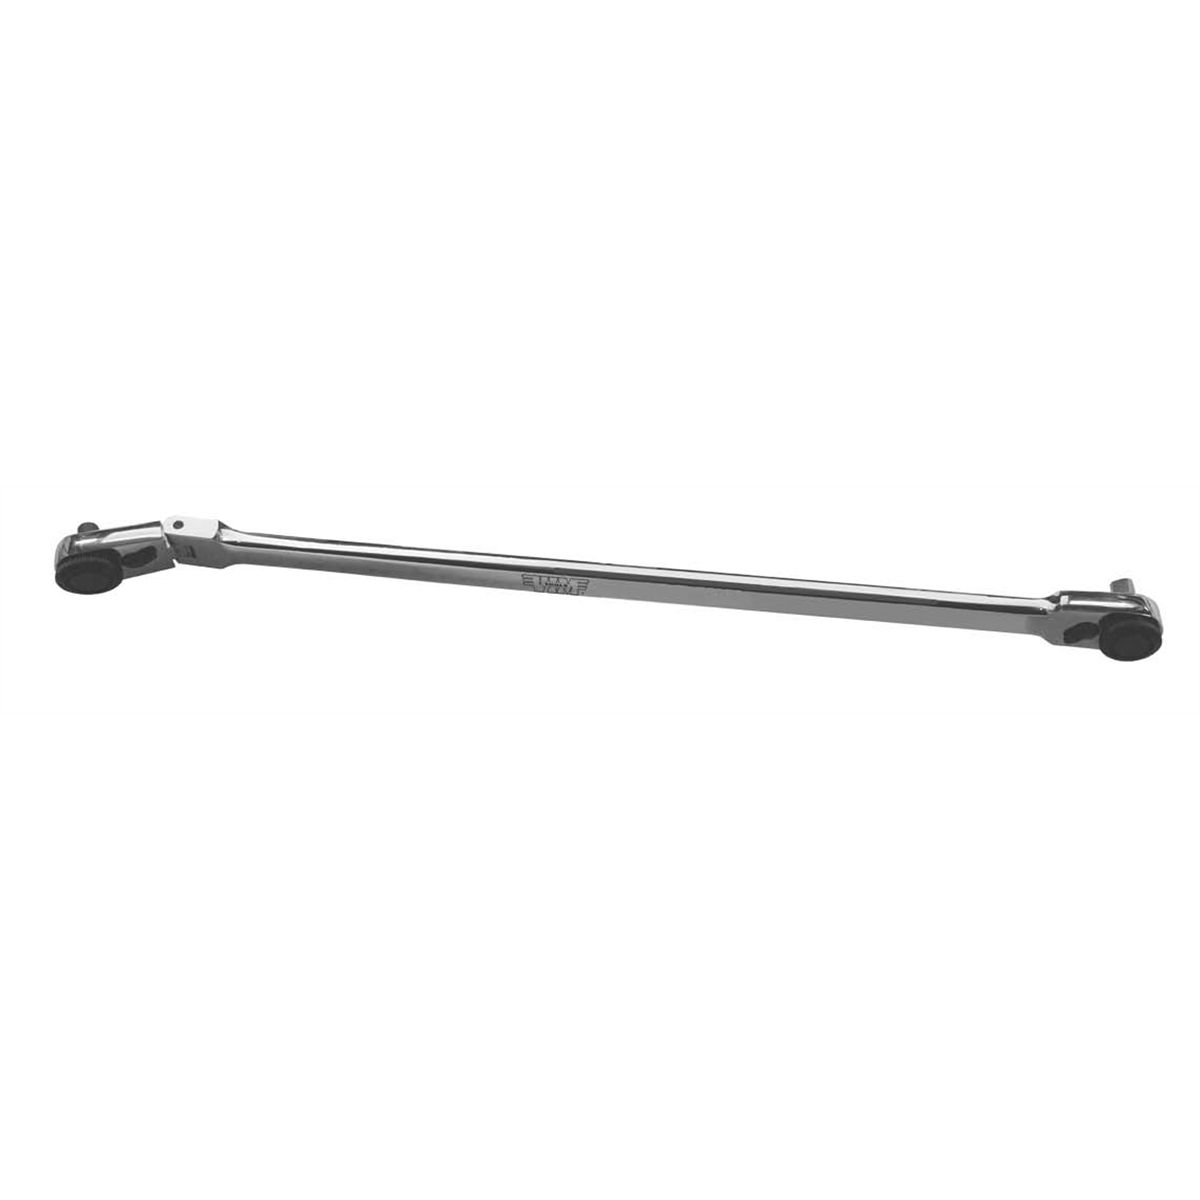 Flex Head Wrench w/ Removable 1/4" Sq. Dr. Adapter